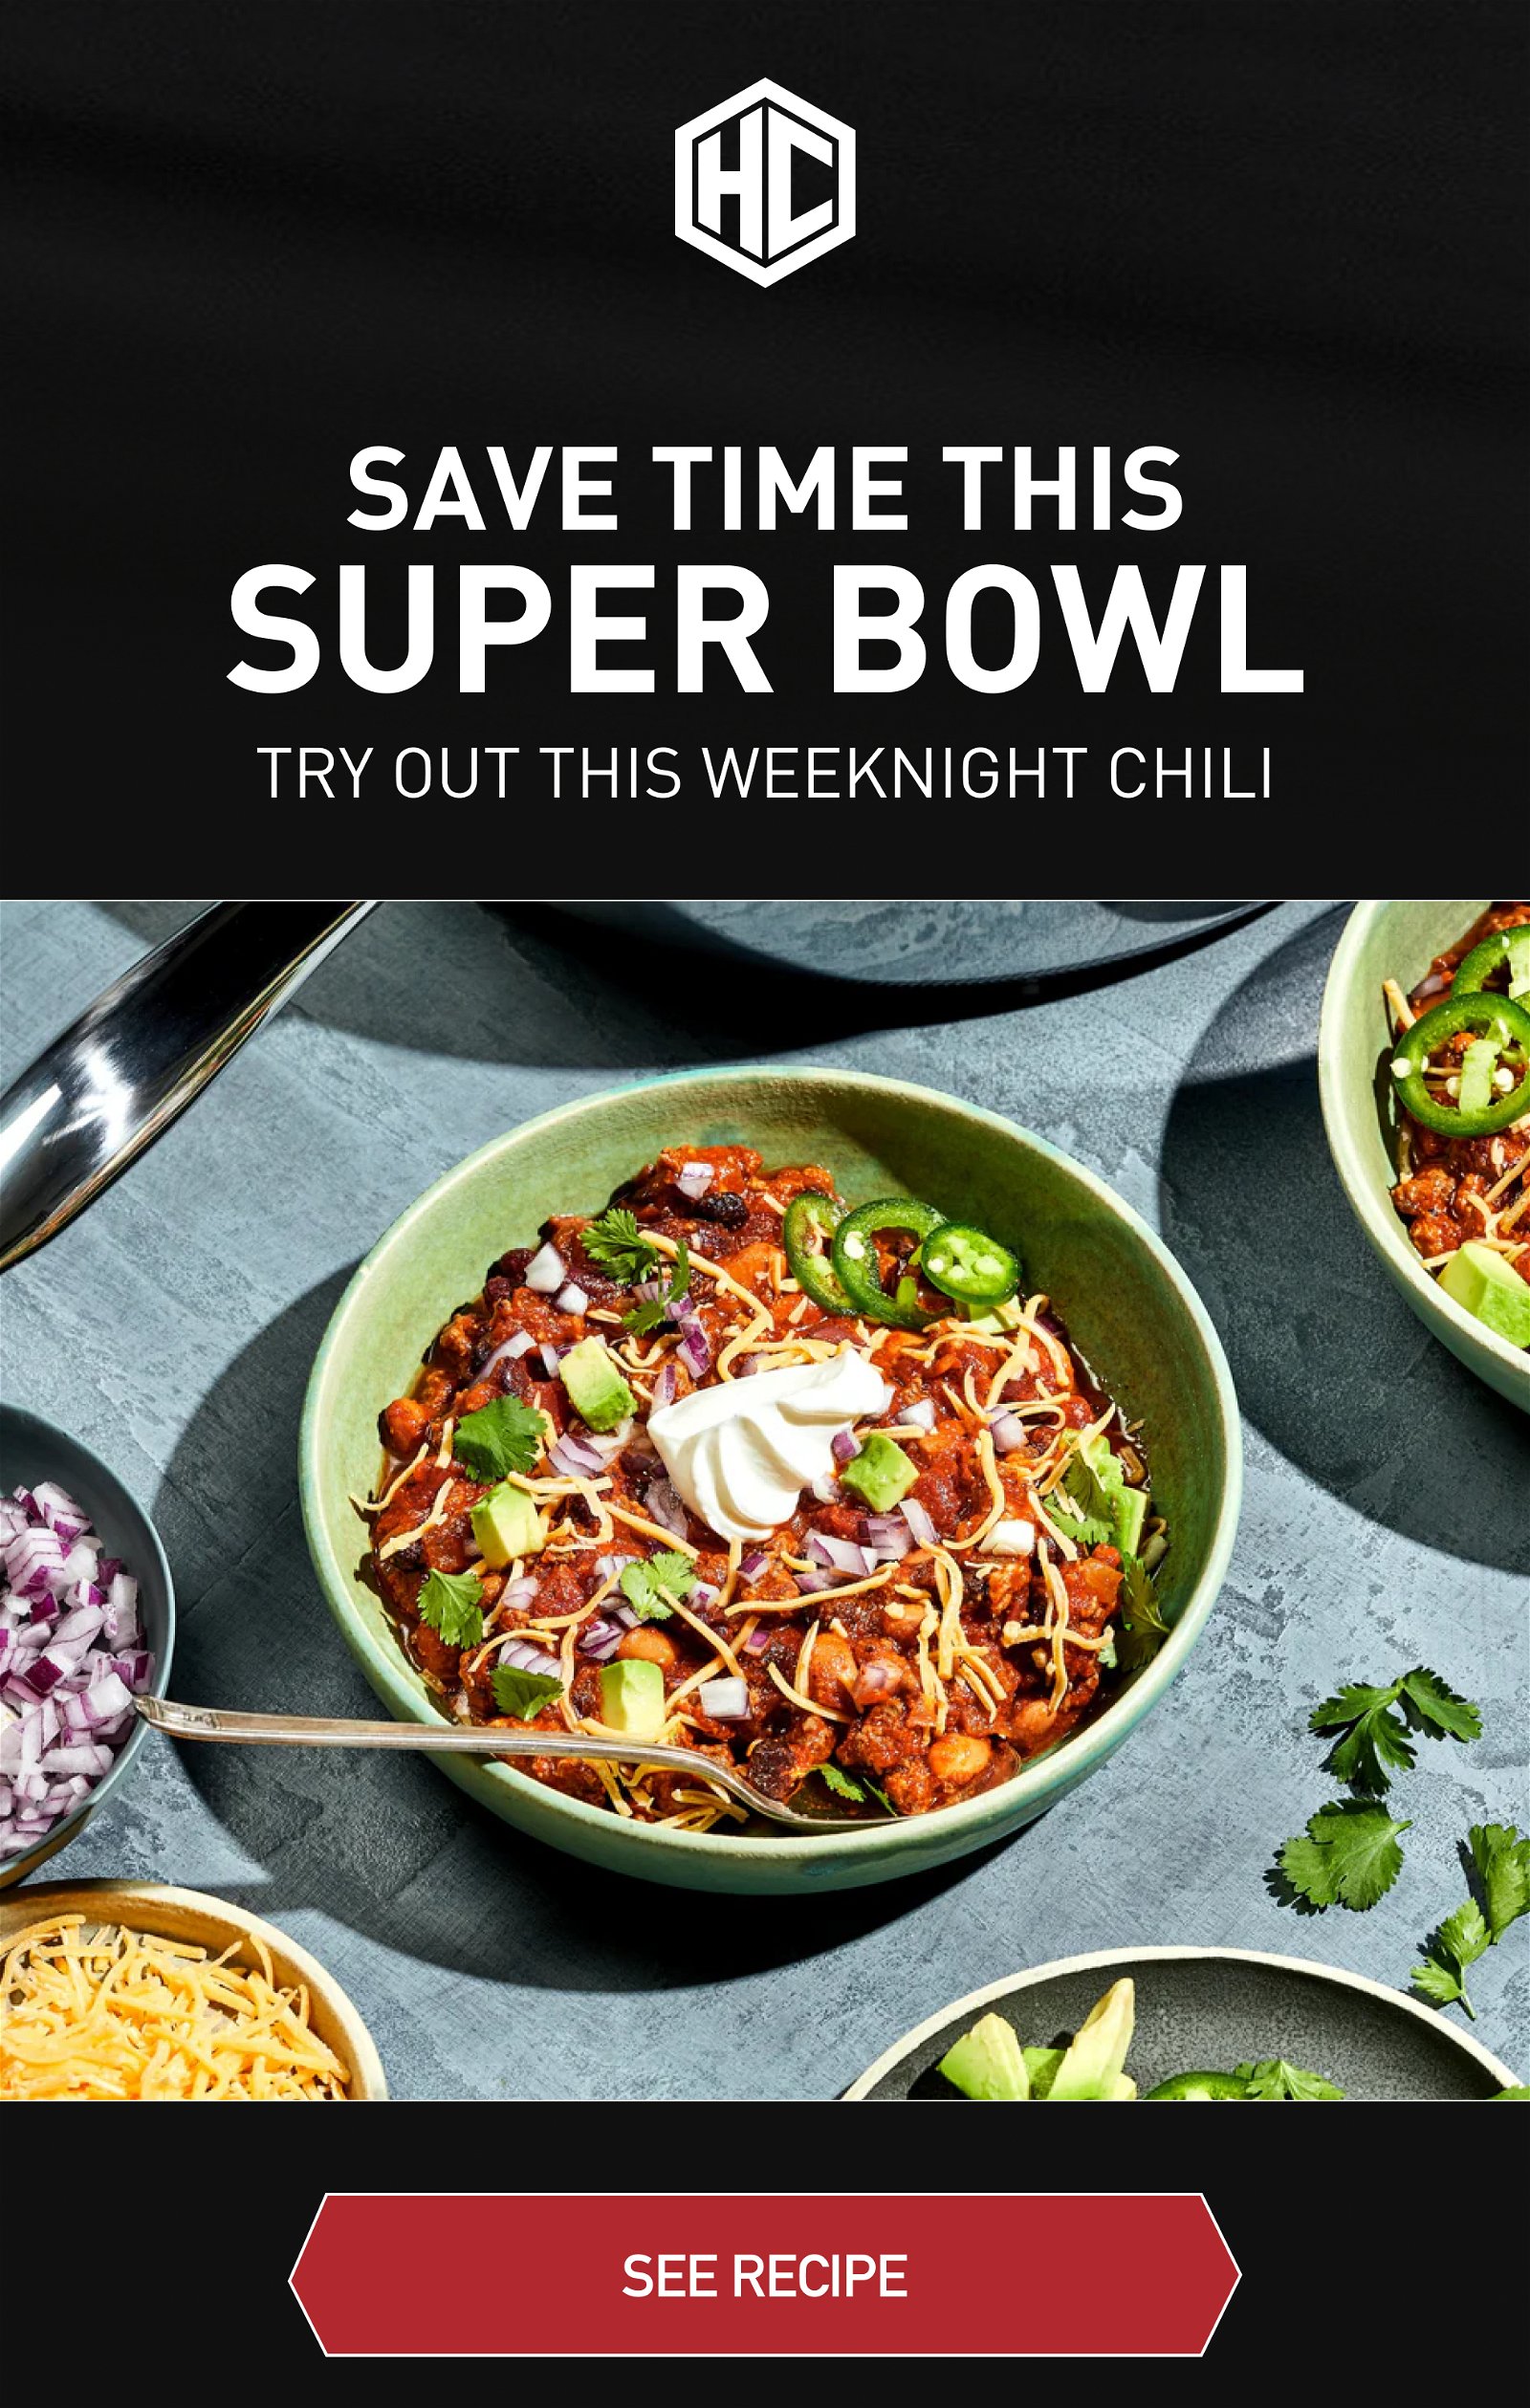 Save time this Super Bowl! Try out this Weeknight Chili